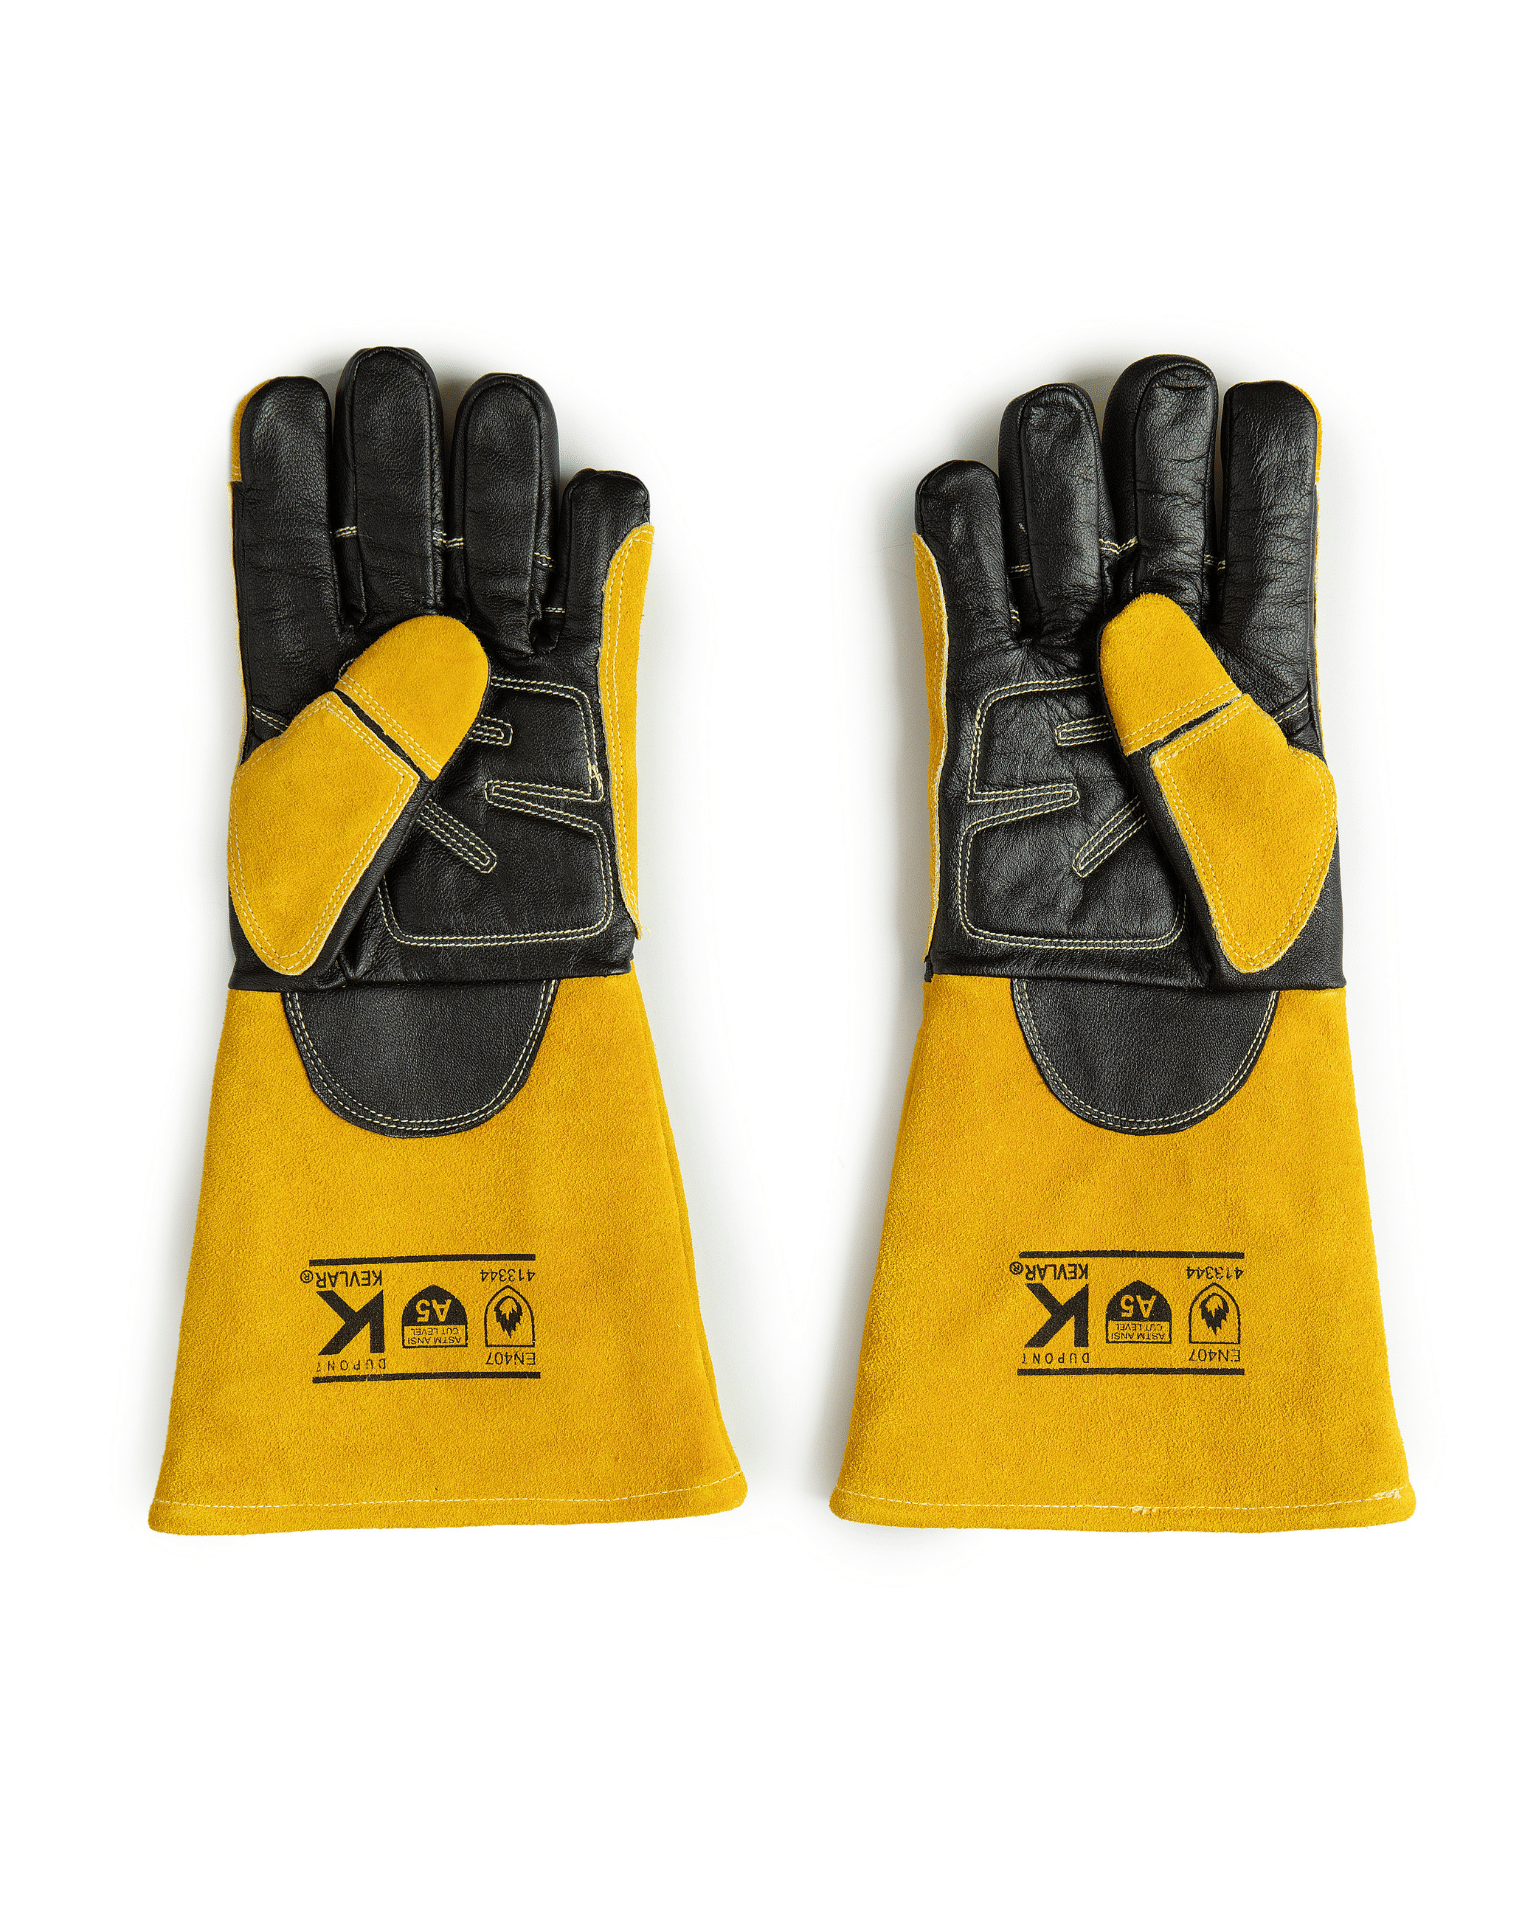 Cut 5 cut-resistant Kelvar lining meets all MIG requirements goat skin leather Welding gloves by Utility Pro